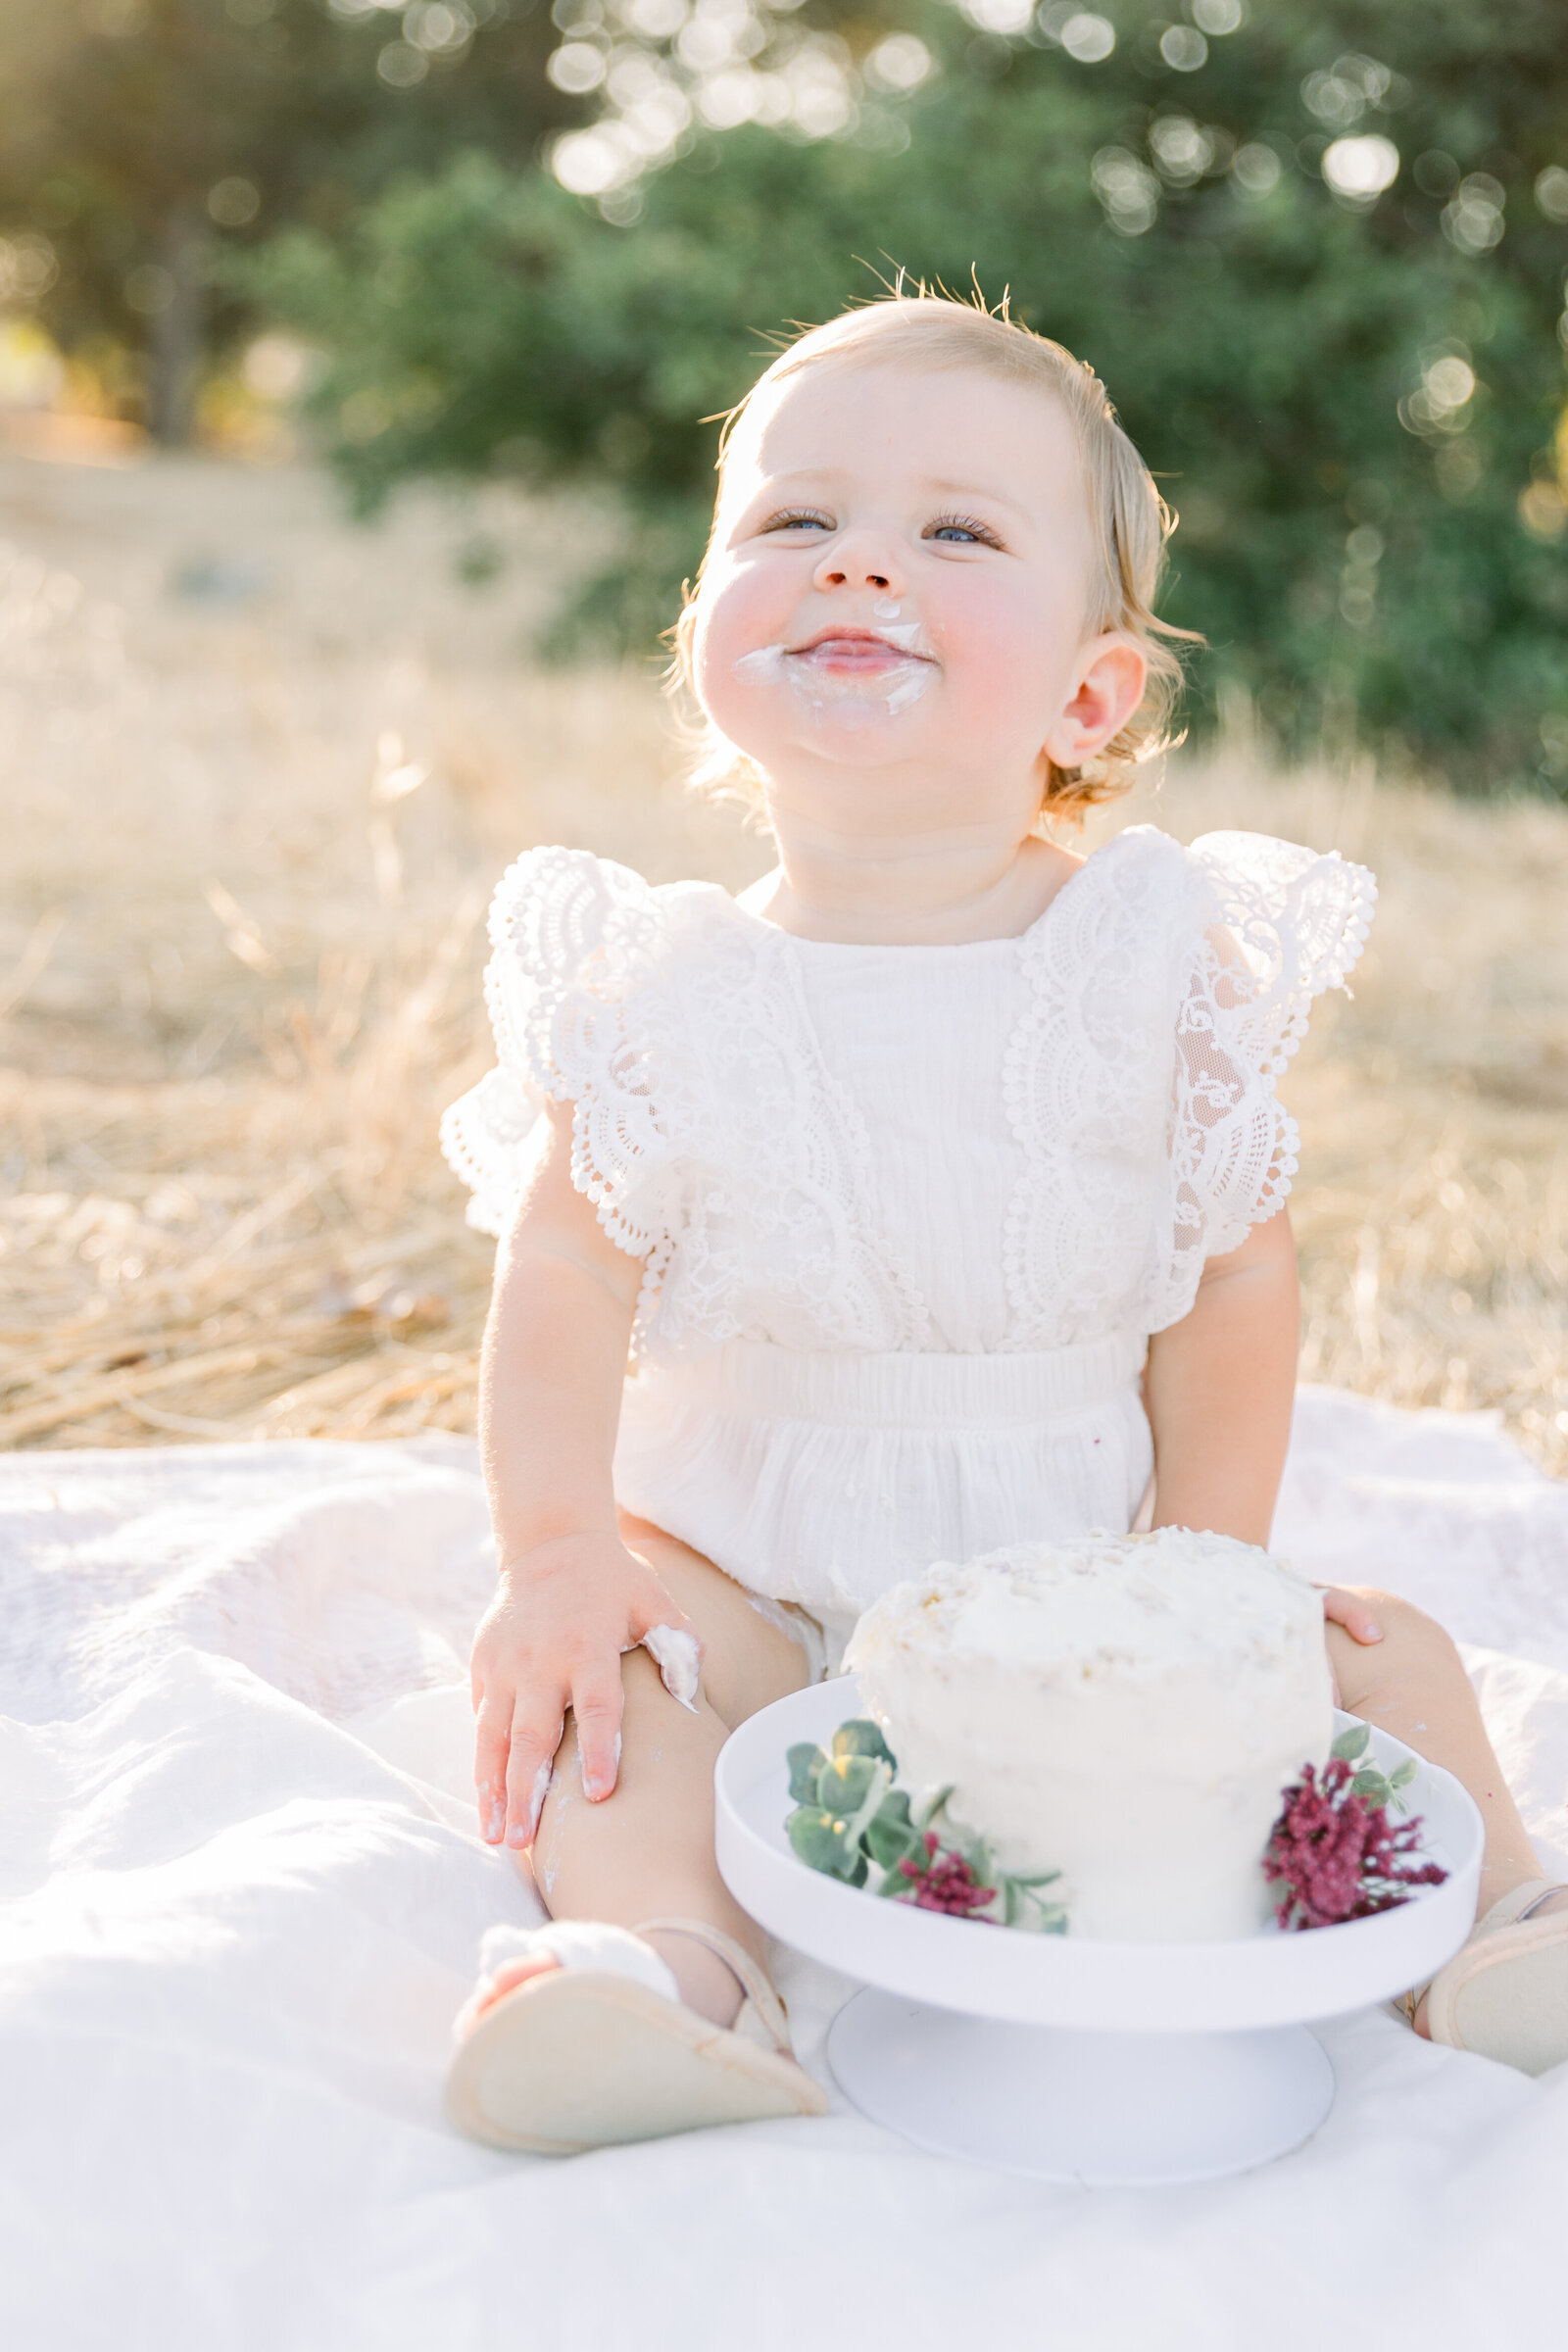 Image of one year old baby and cake smash taken by Sacramento Newborn Photographer Kelsey Krall